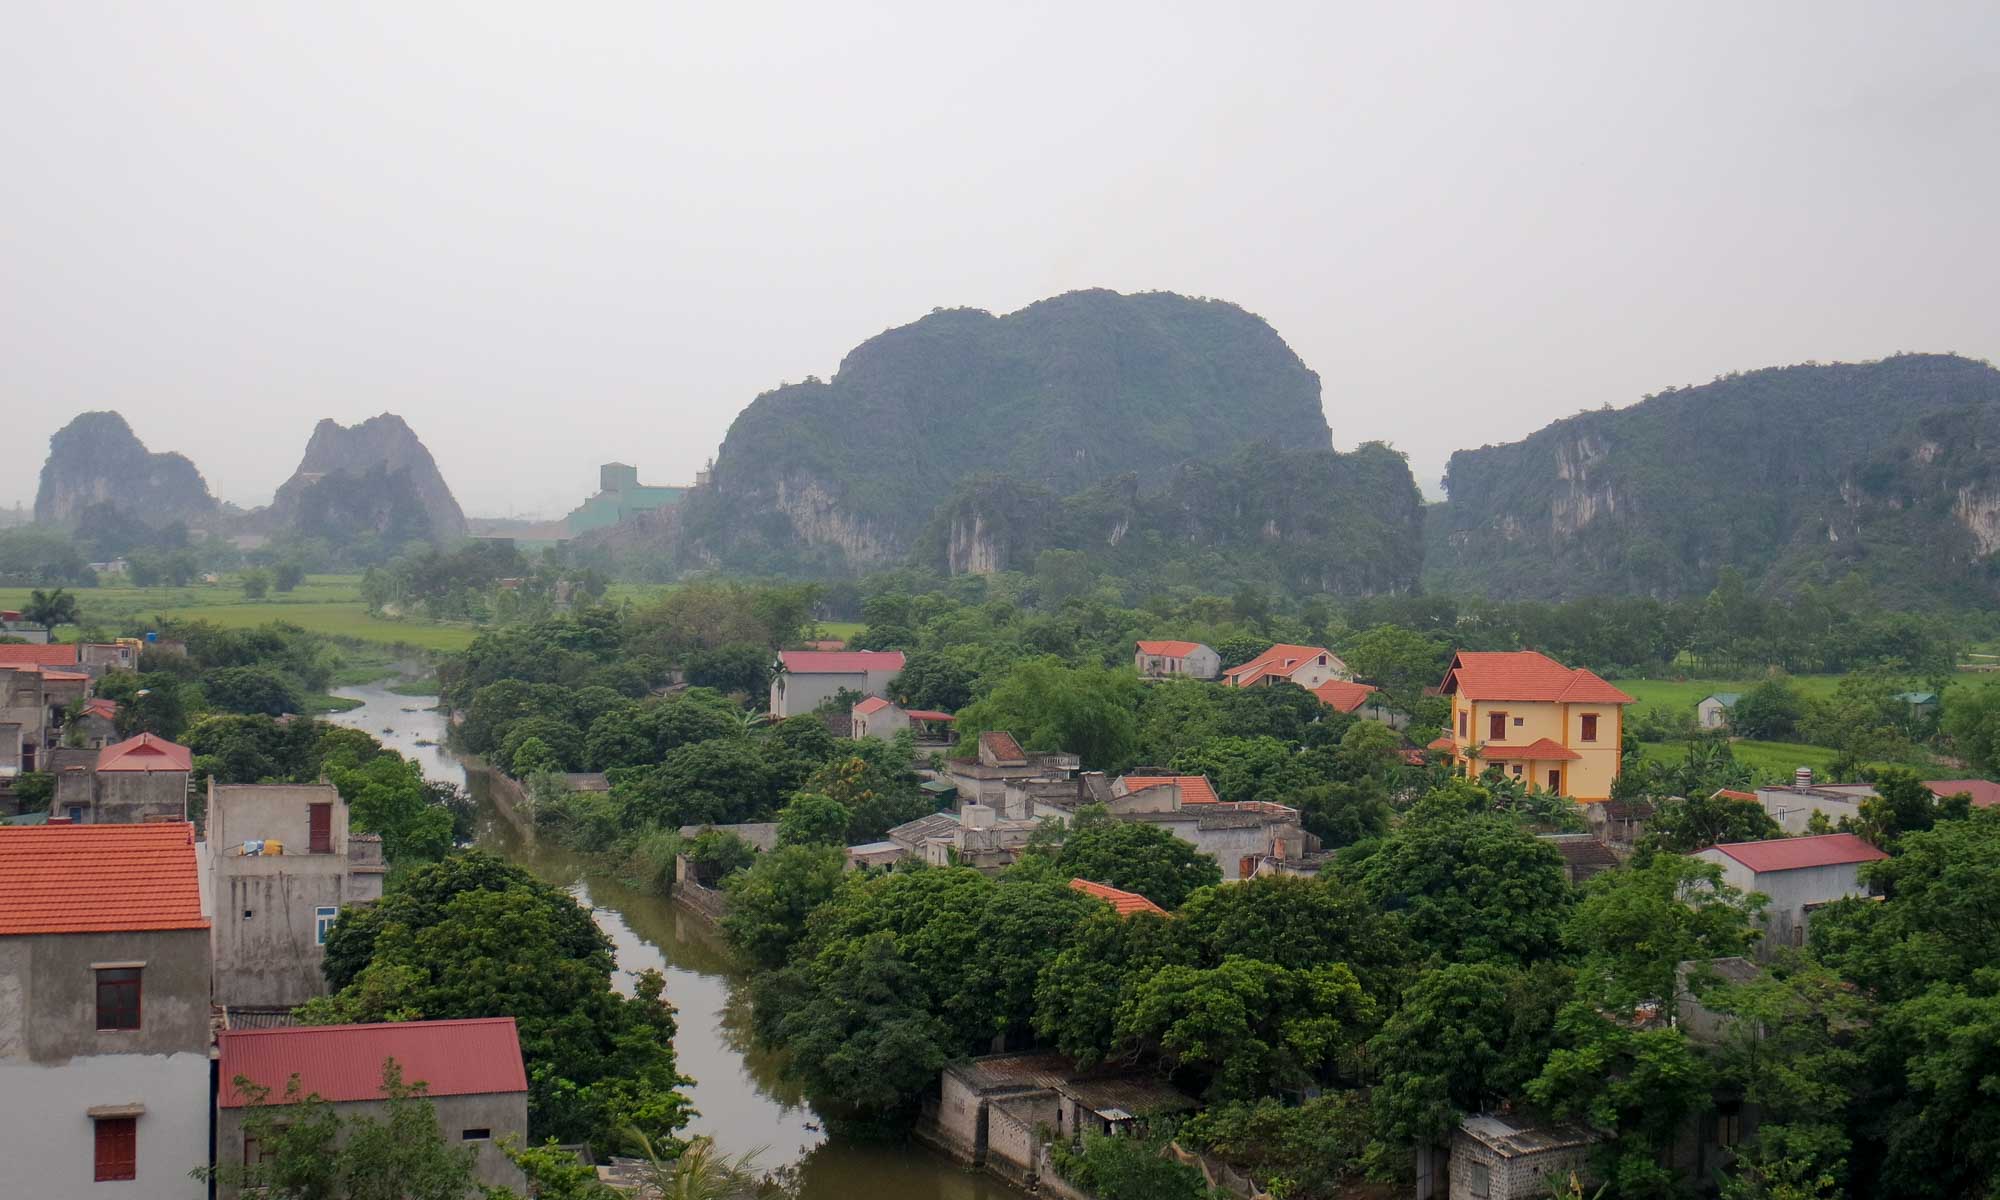 View on Tam Coc from our hotel